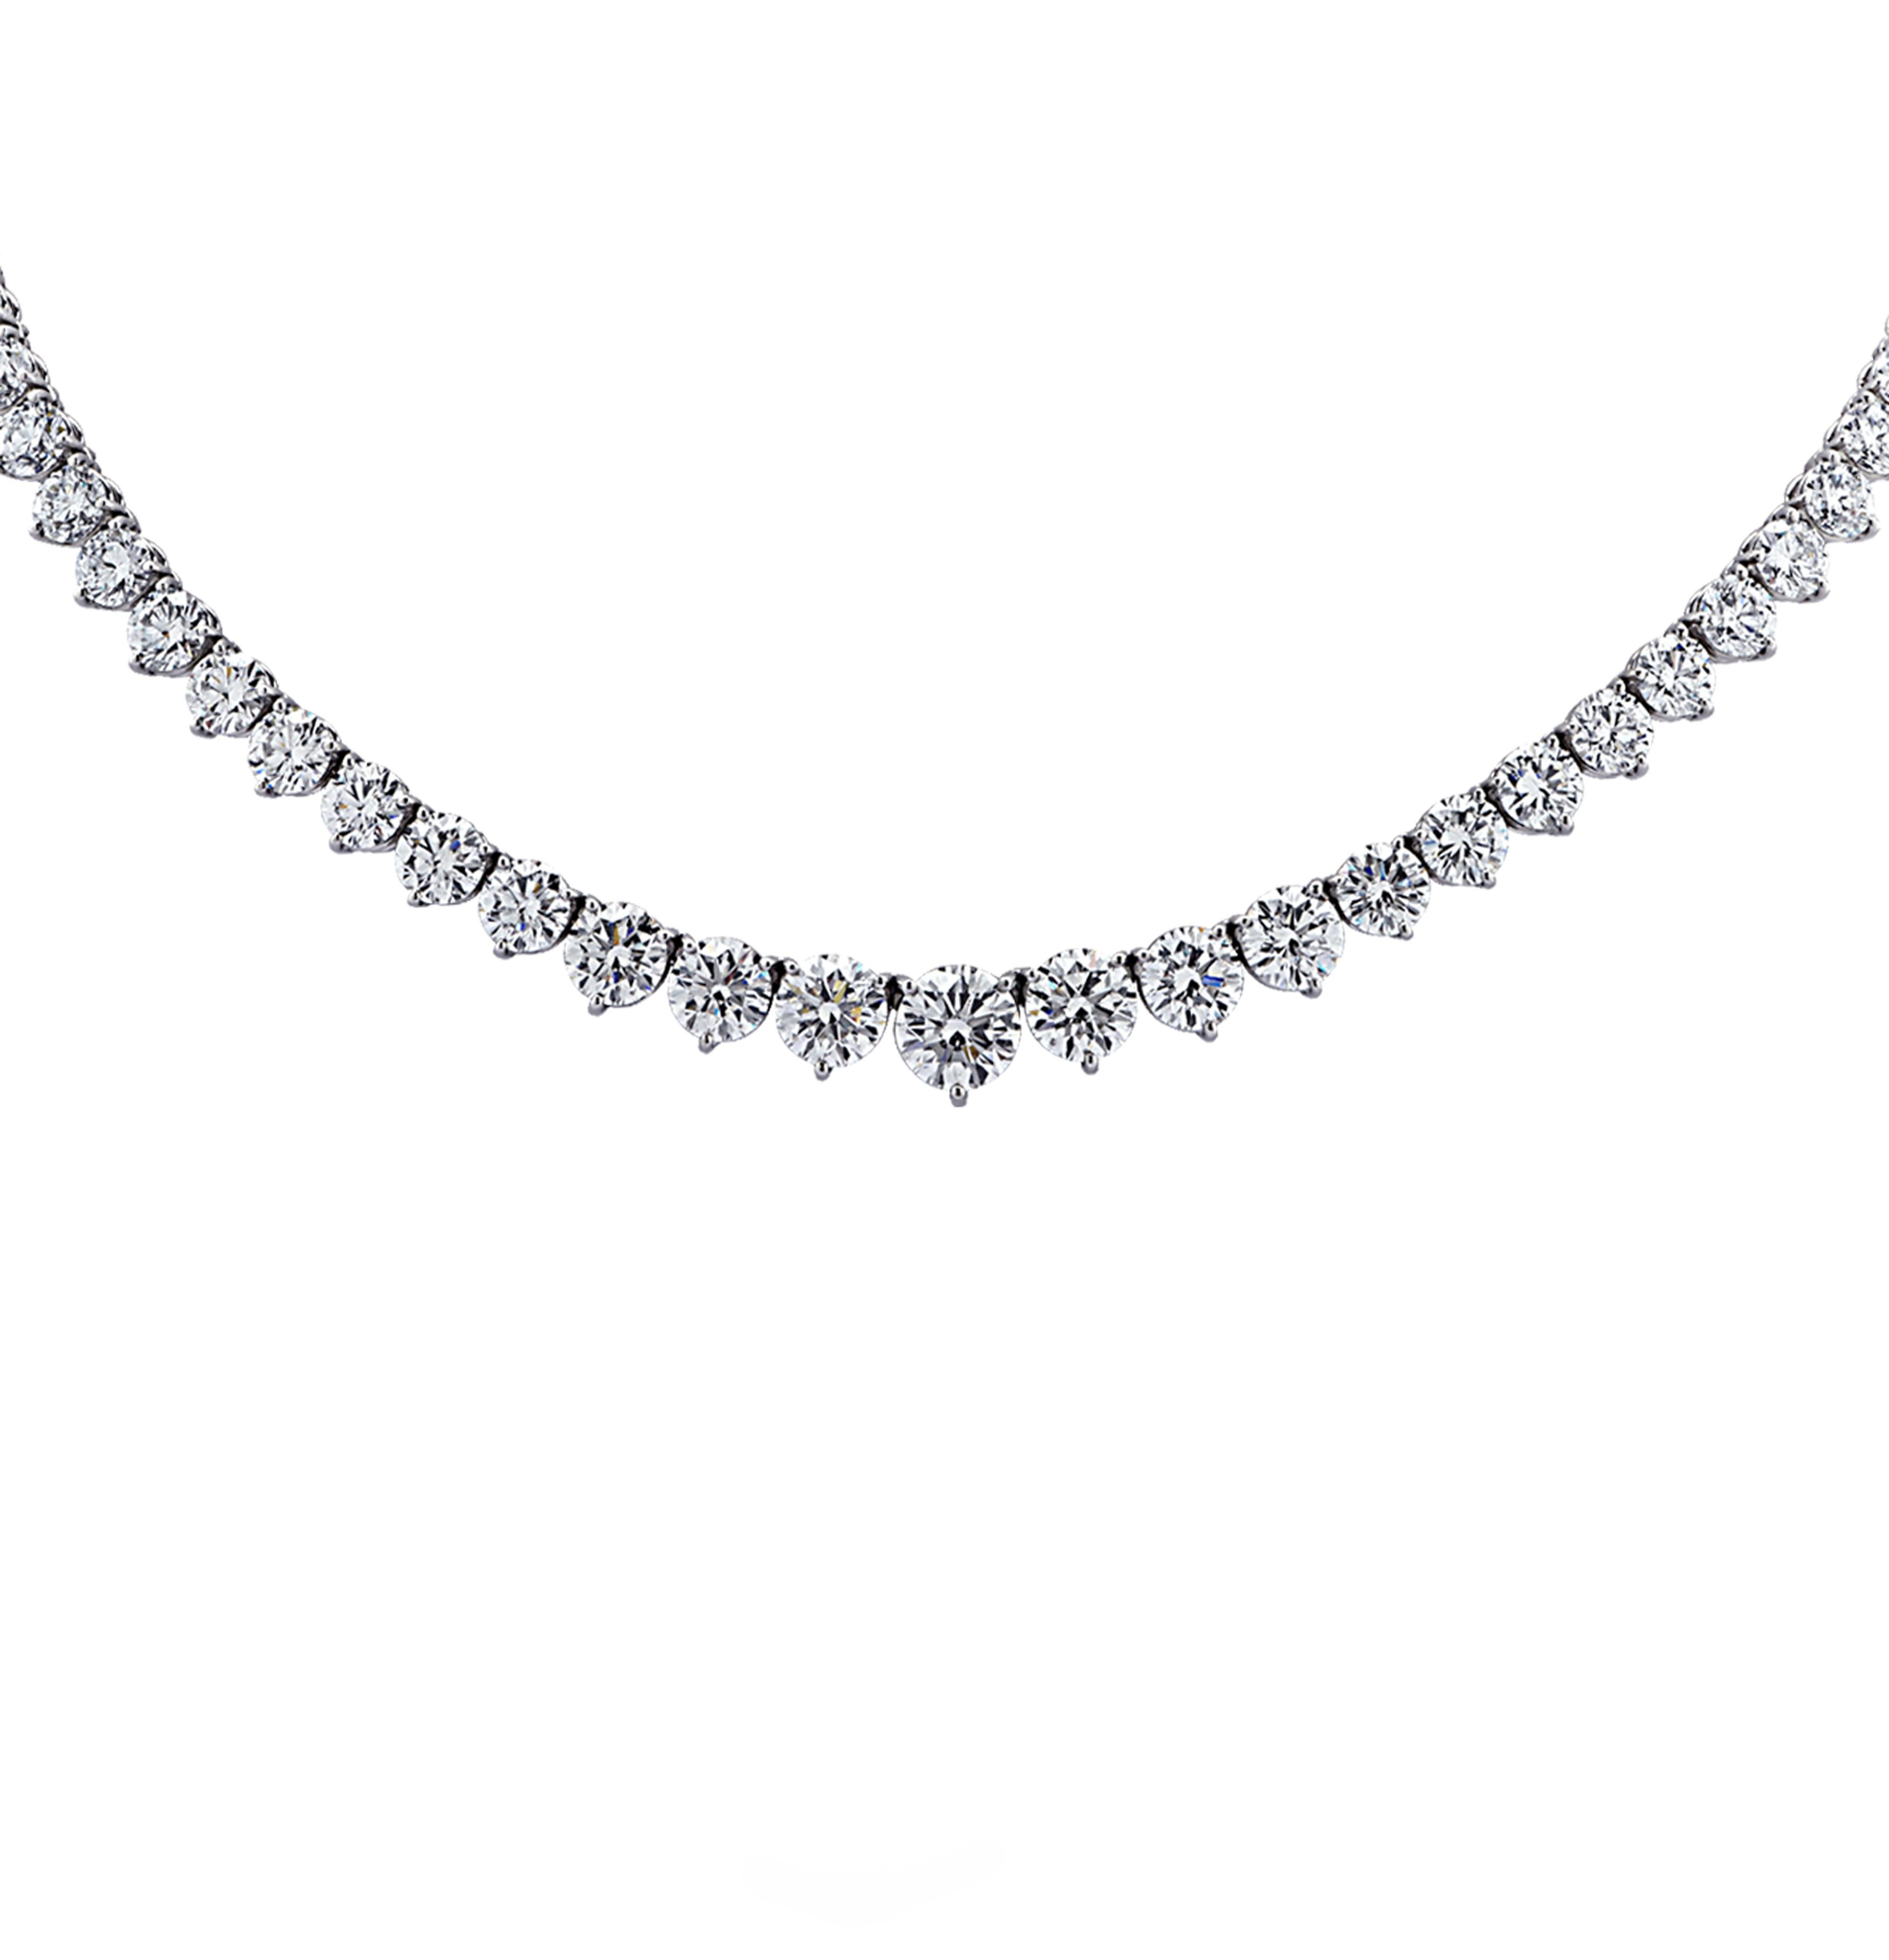 Exquisite Vivid Diamonds diamond Riviera necklace crafted in platinum, showcasing 84 round brilliant cut diamonds weighing 37.03 carats total, E-H color, VS-SI Clarity. Eleven of the largest diamonds are certified by the GIA. The diamonds are set in